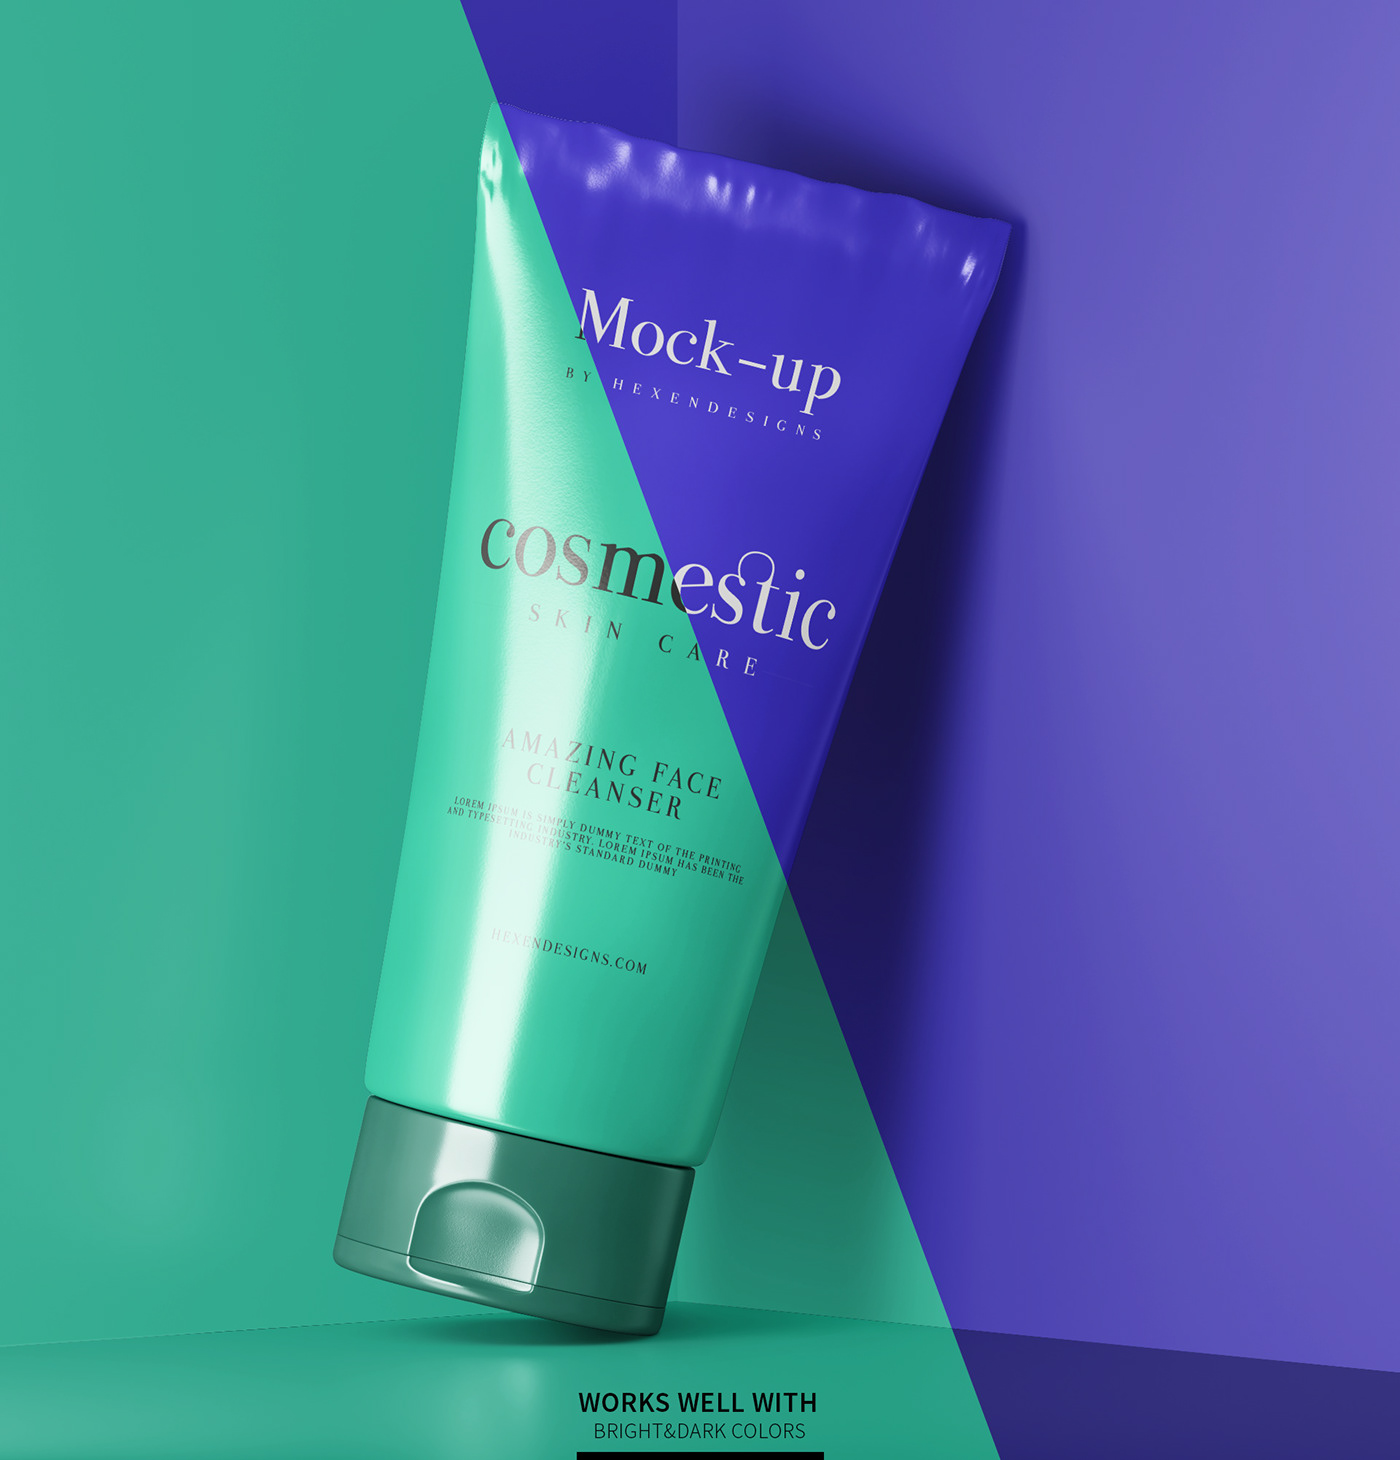 Download 64+ Free PSD Beauty & Cosmetics PSD Mockups for designers and business + Premium version! | Free ...